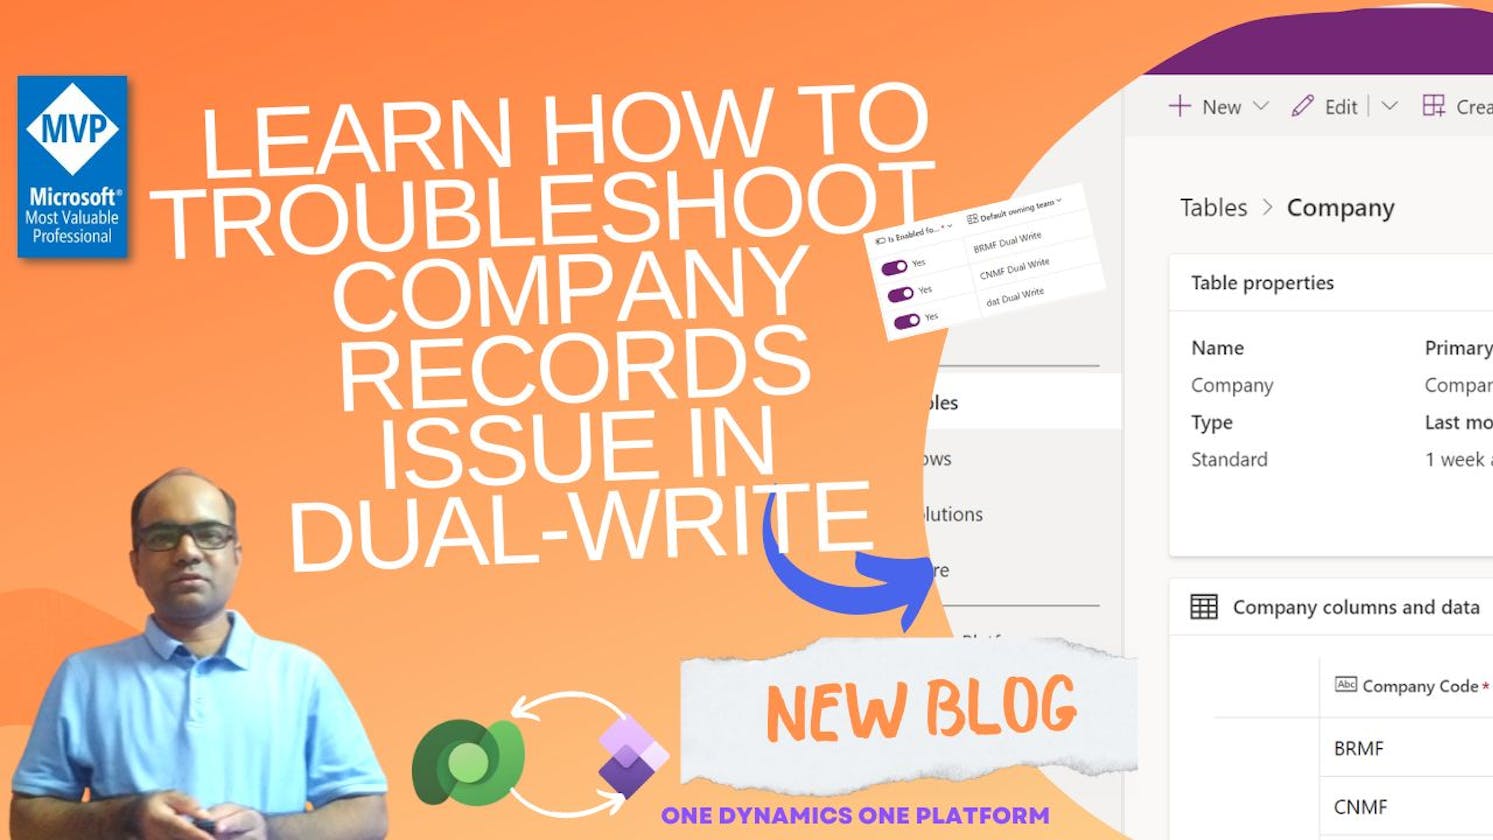 Learn How To Troubleshoot Company Records Issue In Dual-write